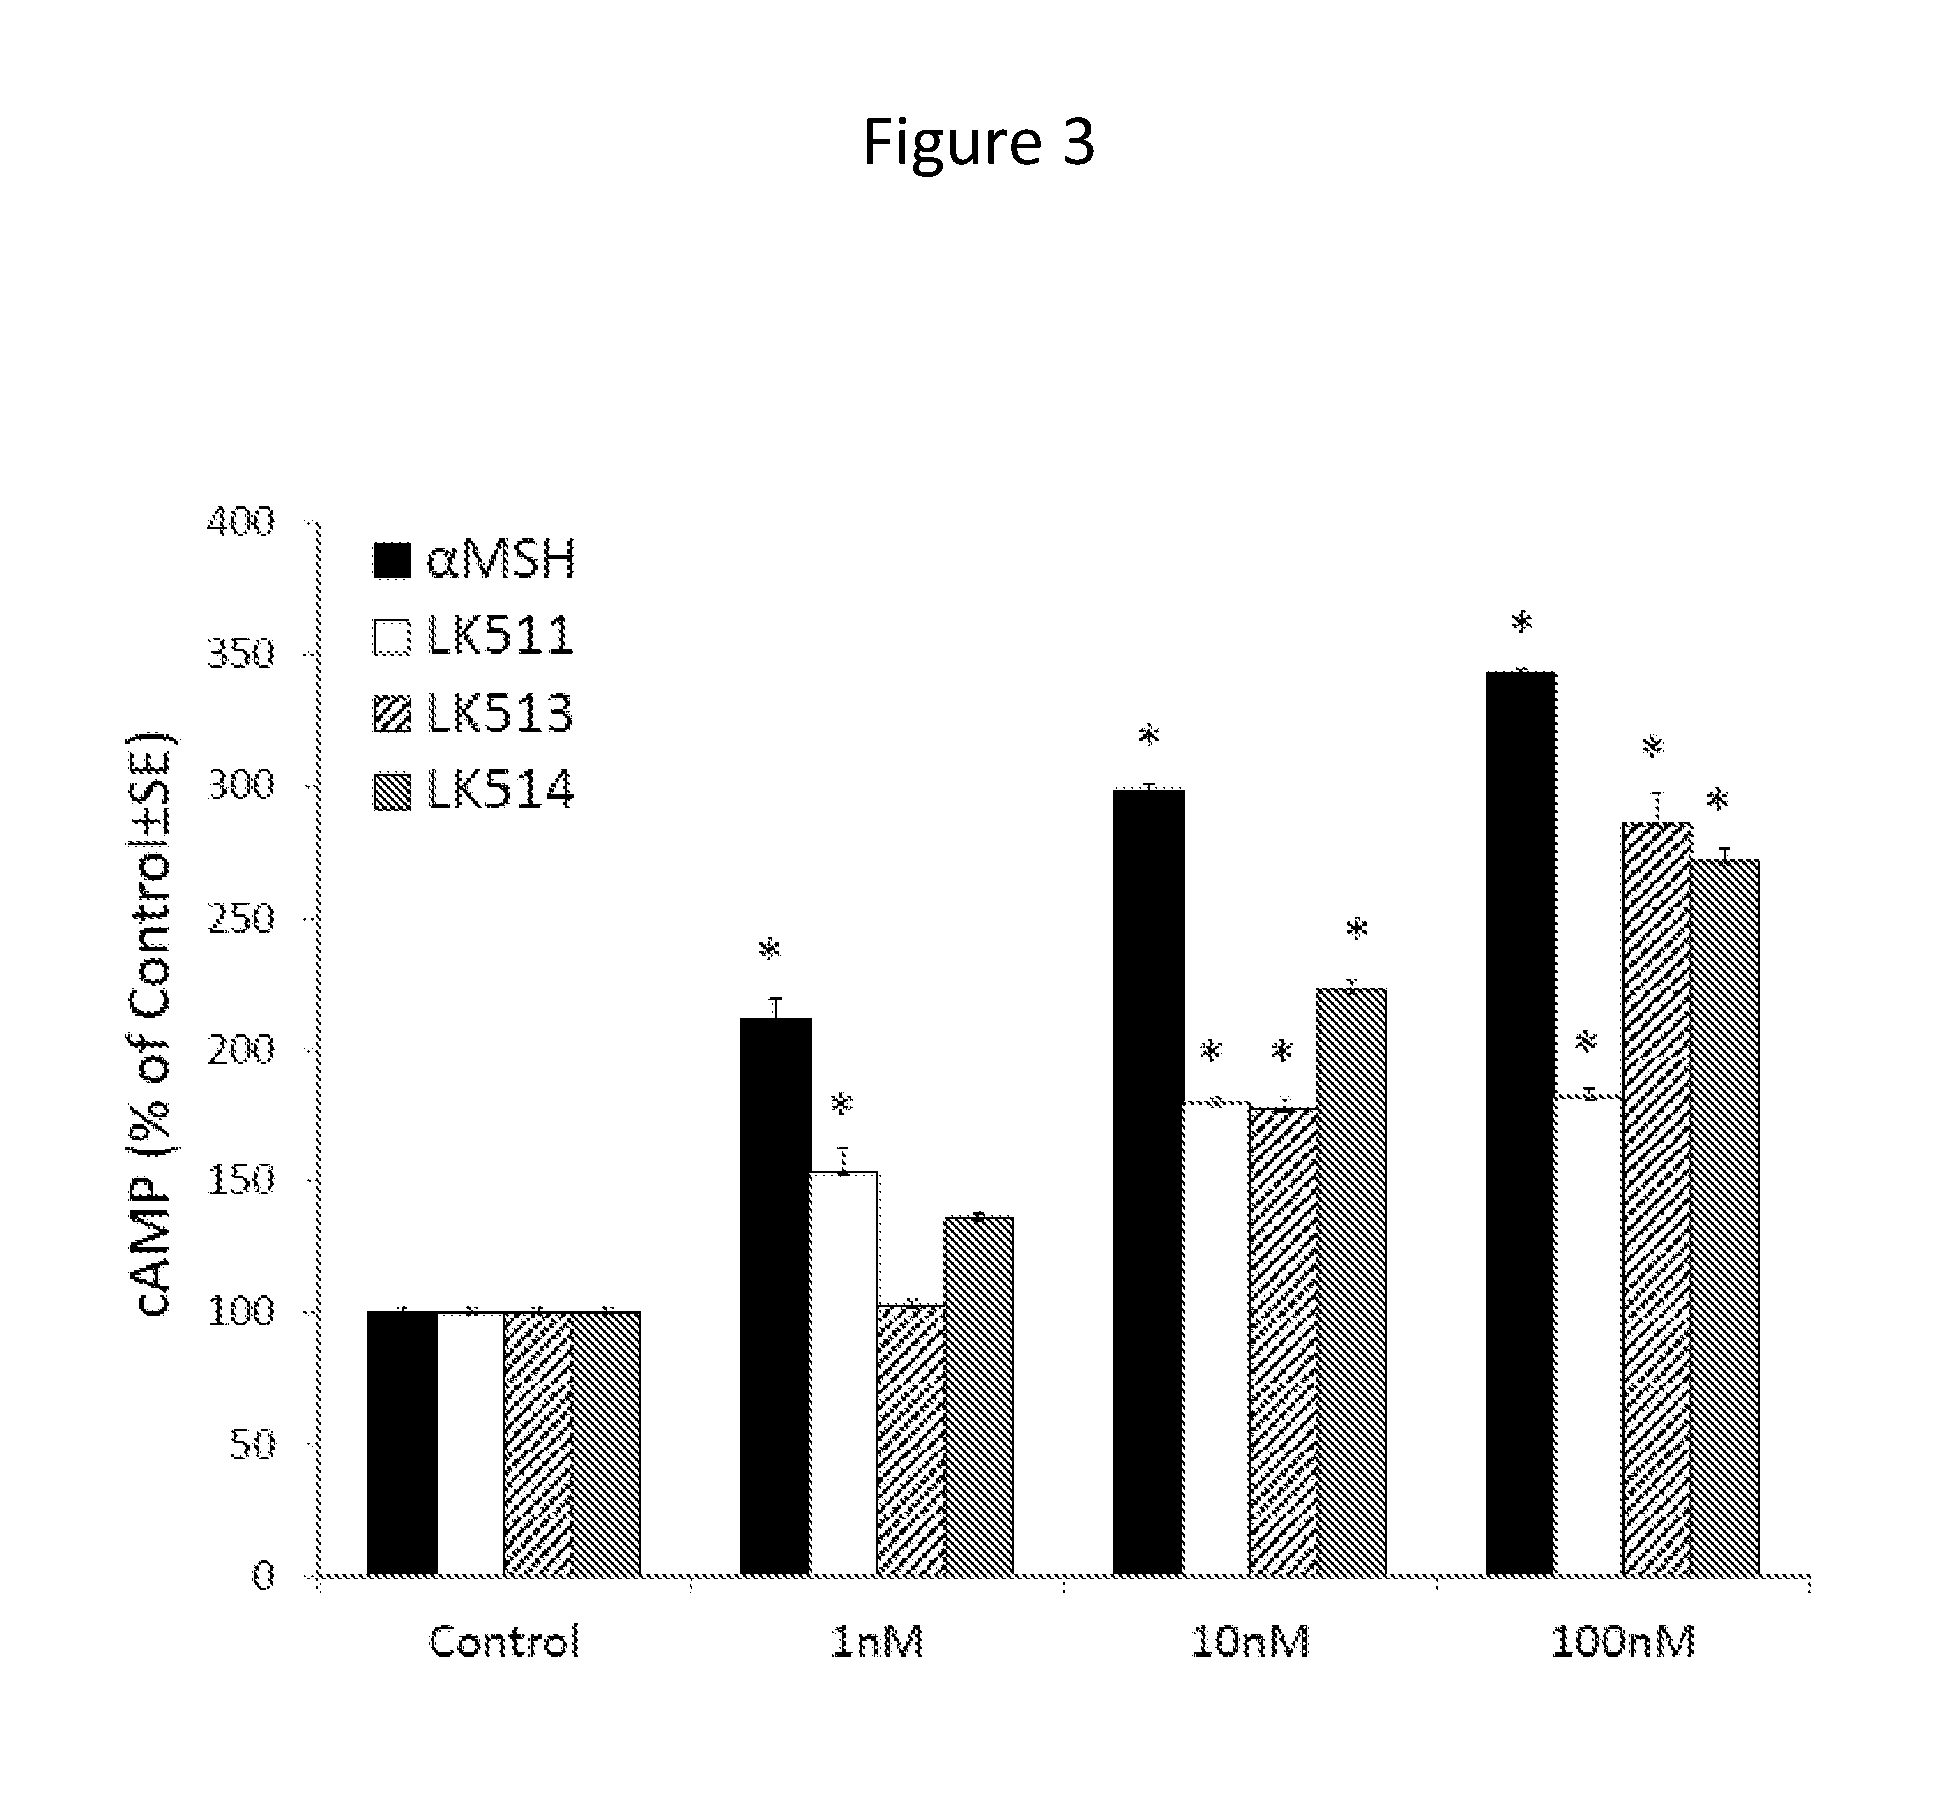 Skin care compositions and methods comprising selective agonists of melanocortin 1 receptor